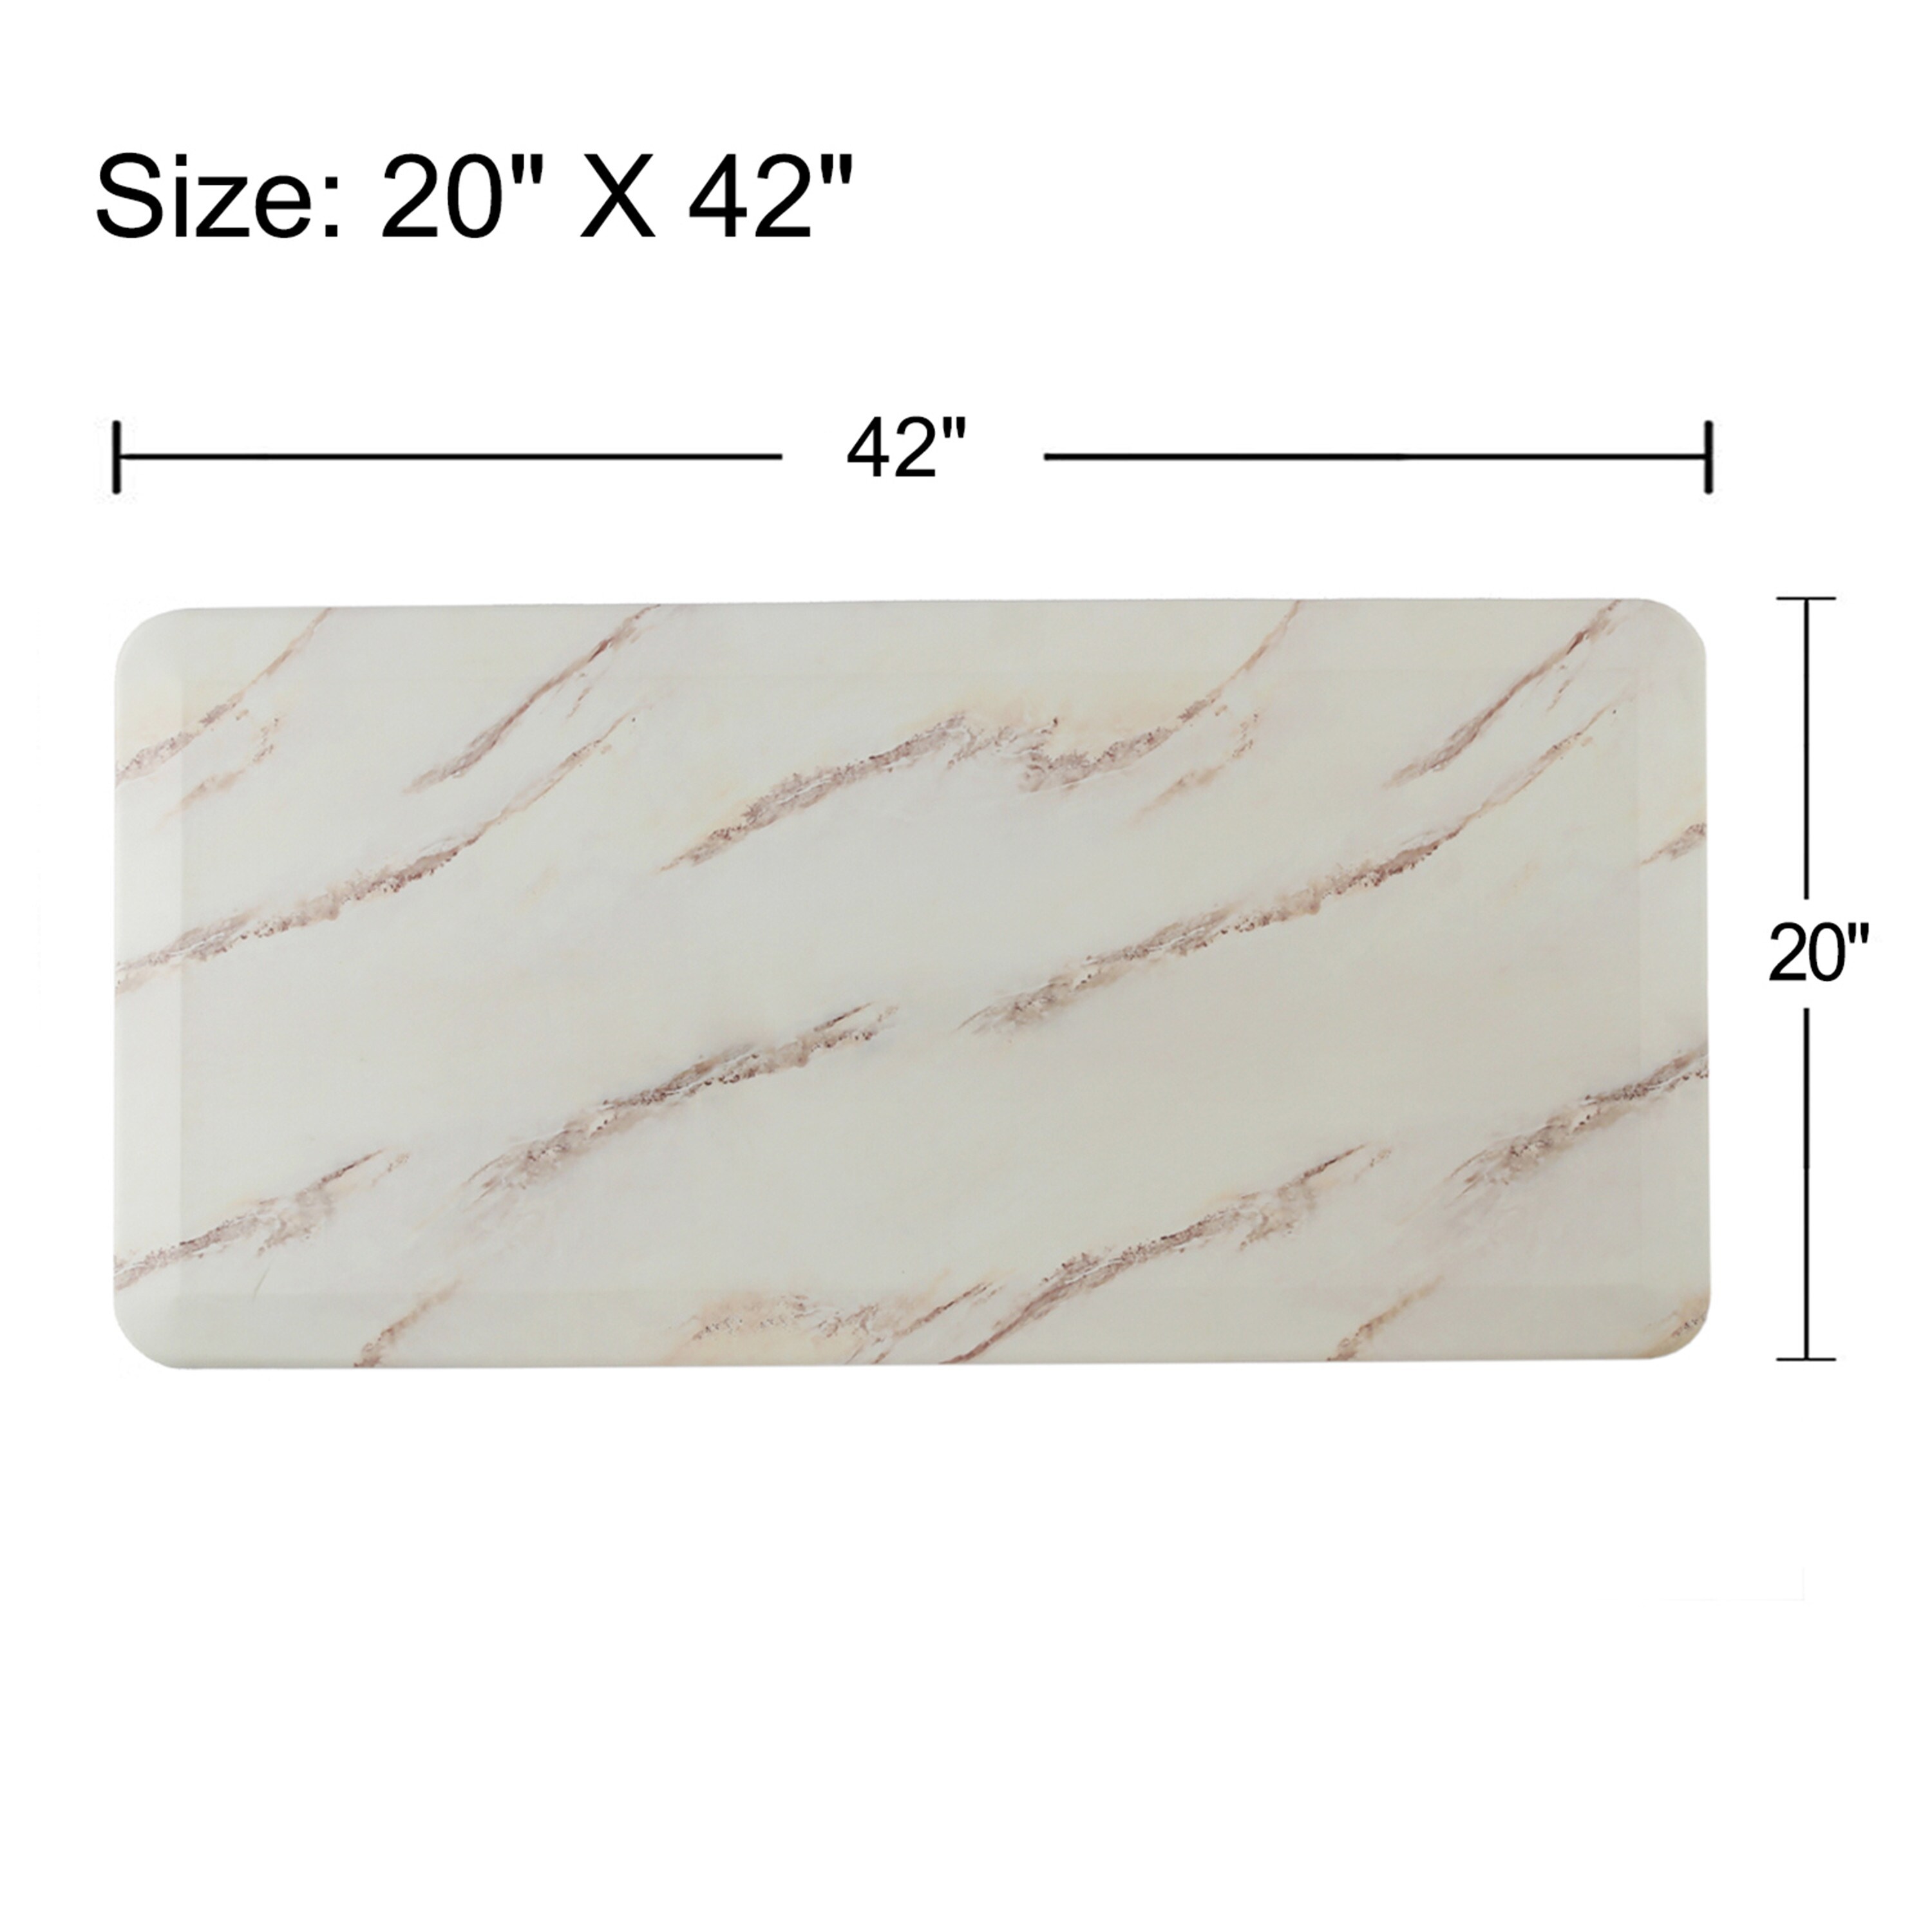 https://ak1.ostkcdn.com/images/products/is/images/direct/168b45e3d704666a0887364e55e9daaf1e99ce4c/FRESHMINT-Anti-Fatigue-Marble-Print-Mats-%2C-Perfect-for-Kitchens-and-Standing-Desks-42-x-20-Inch.jpg